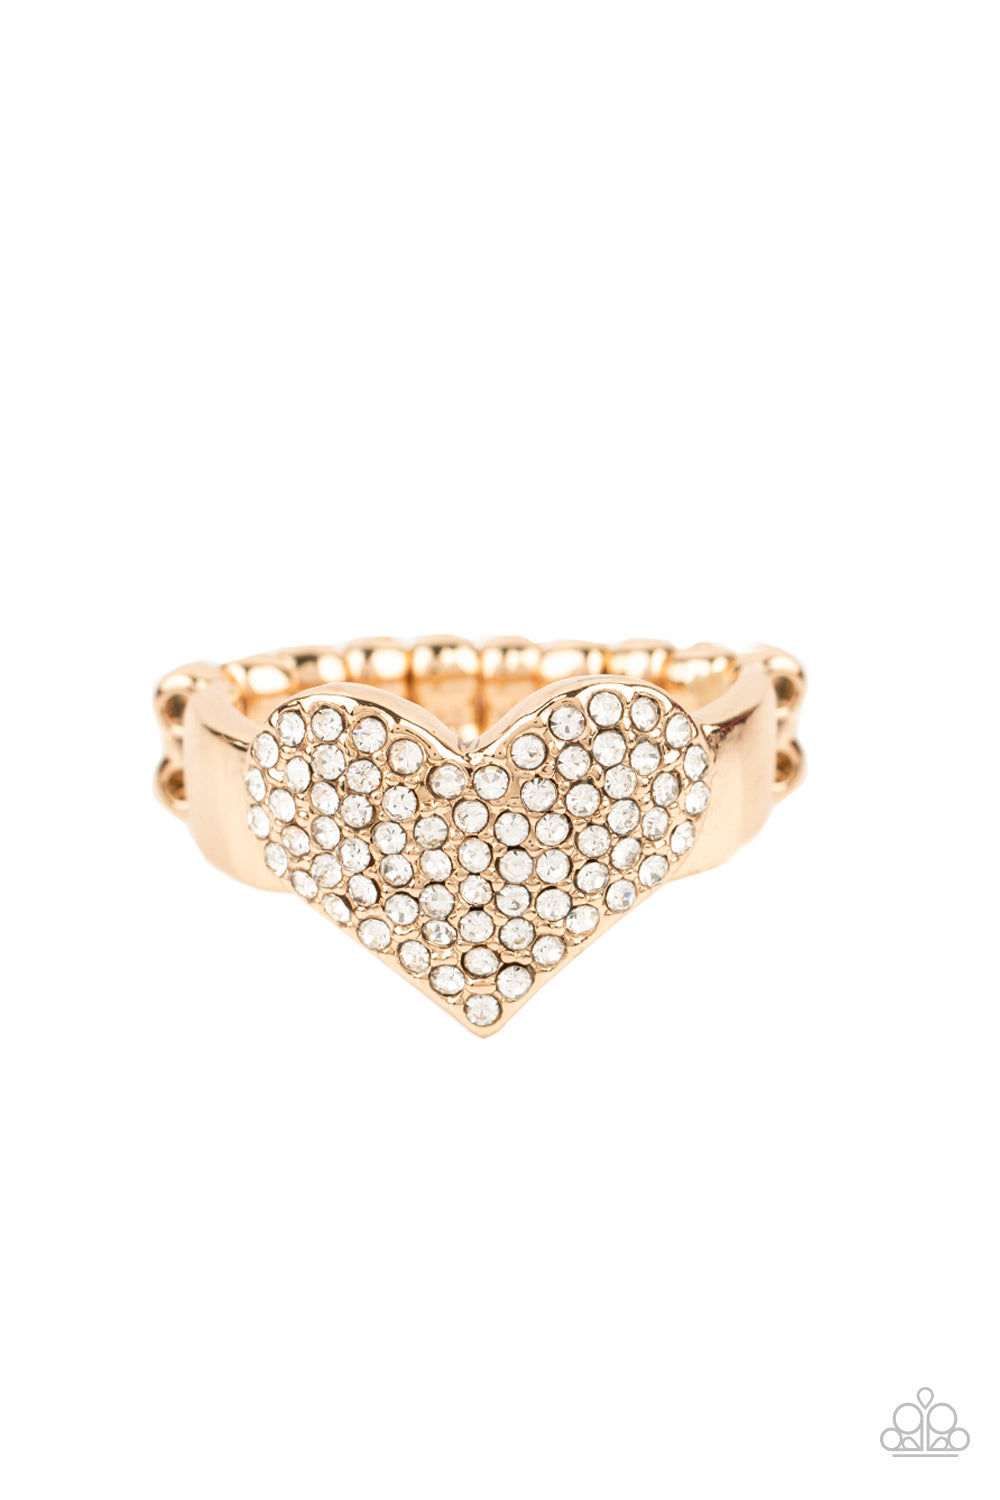 heart-of-bling-gold-p4re-gdxx-215xx